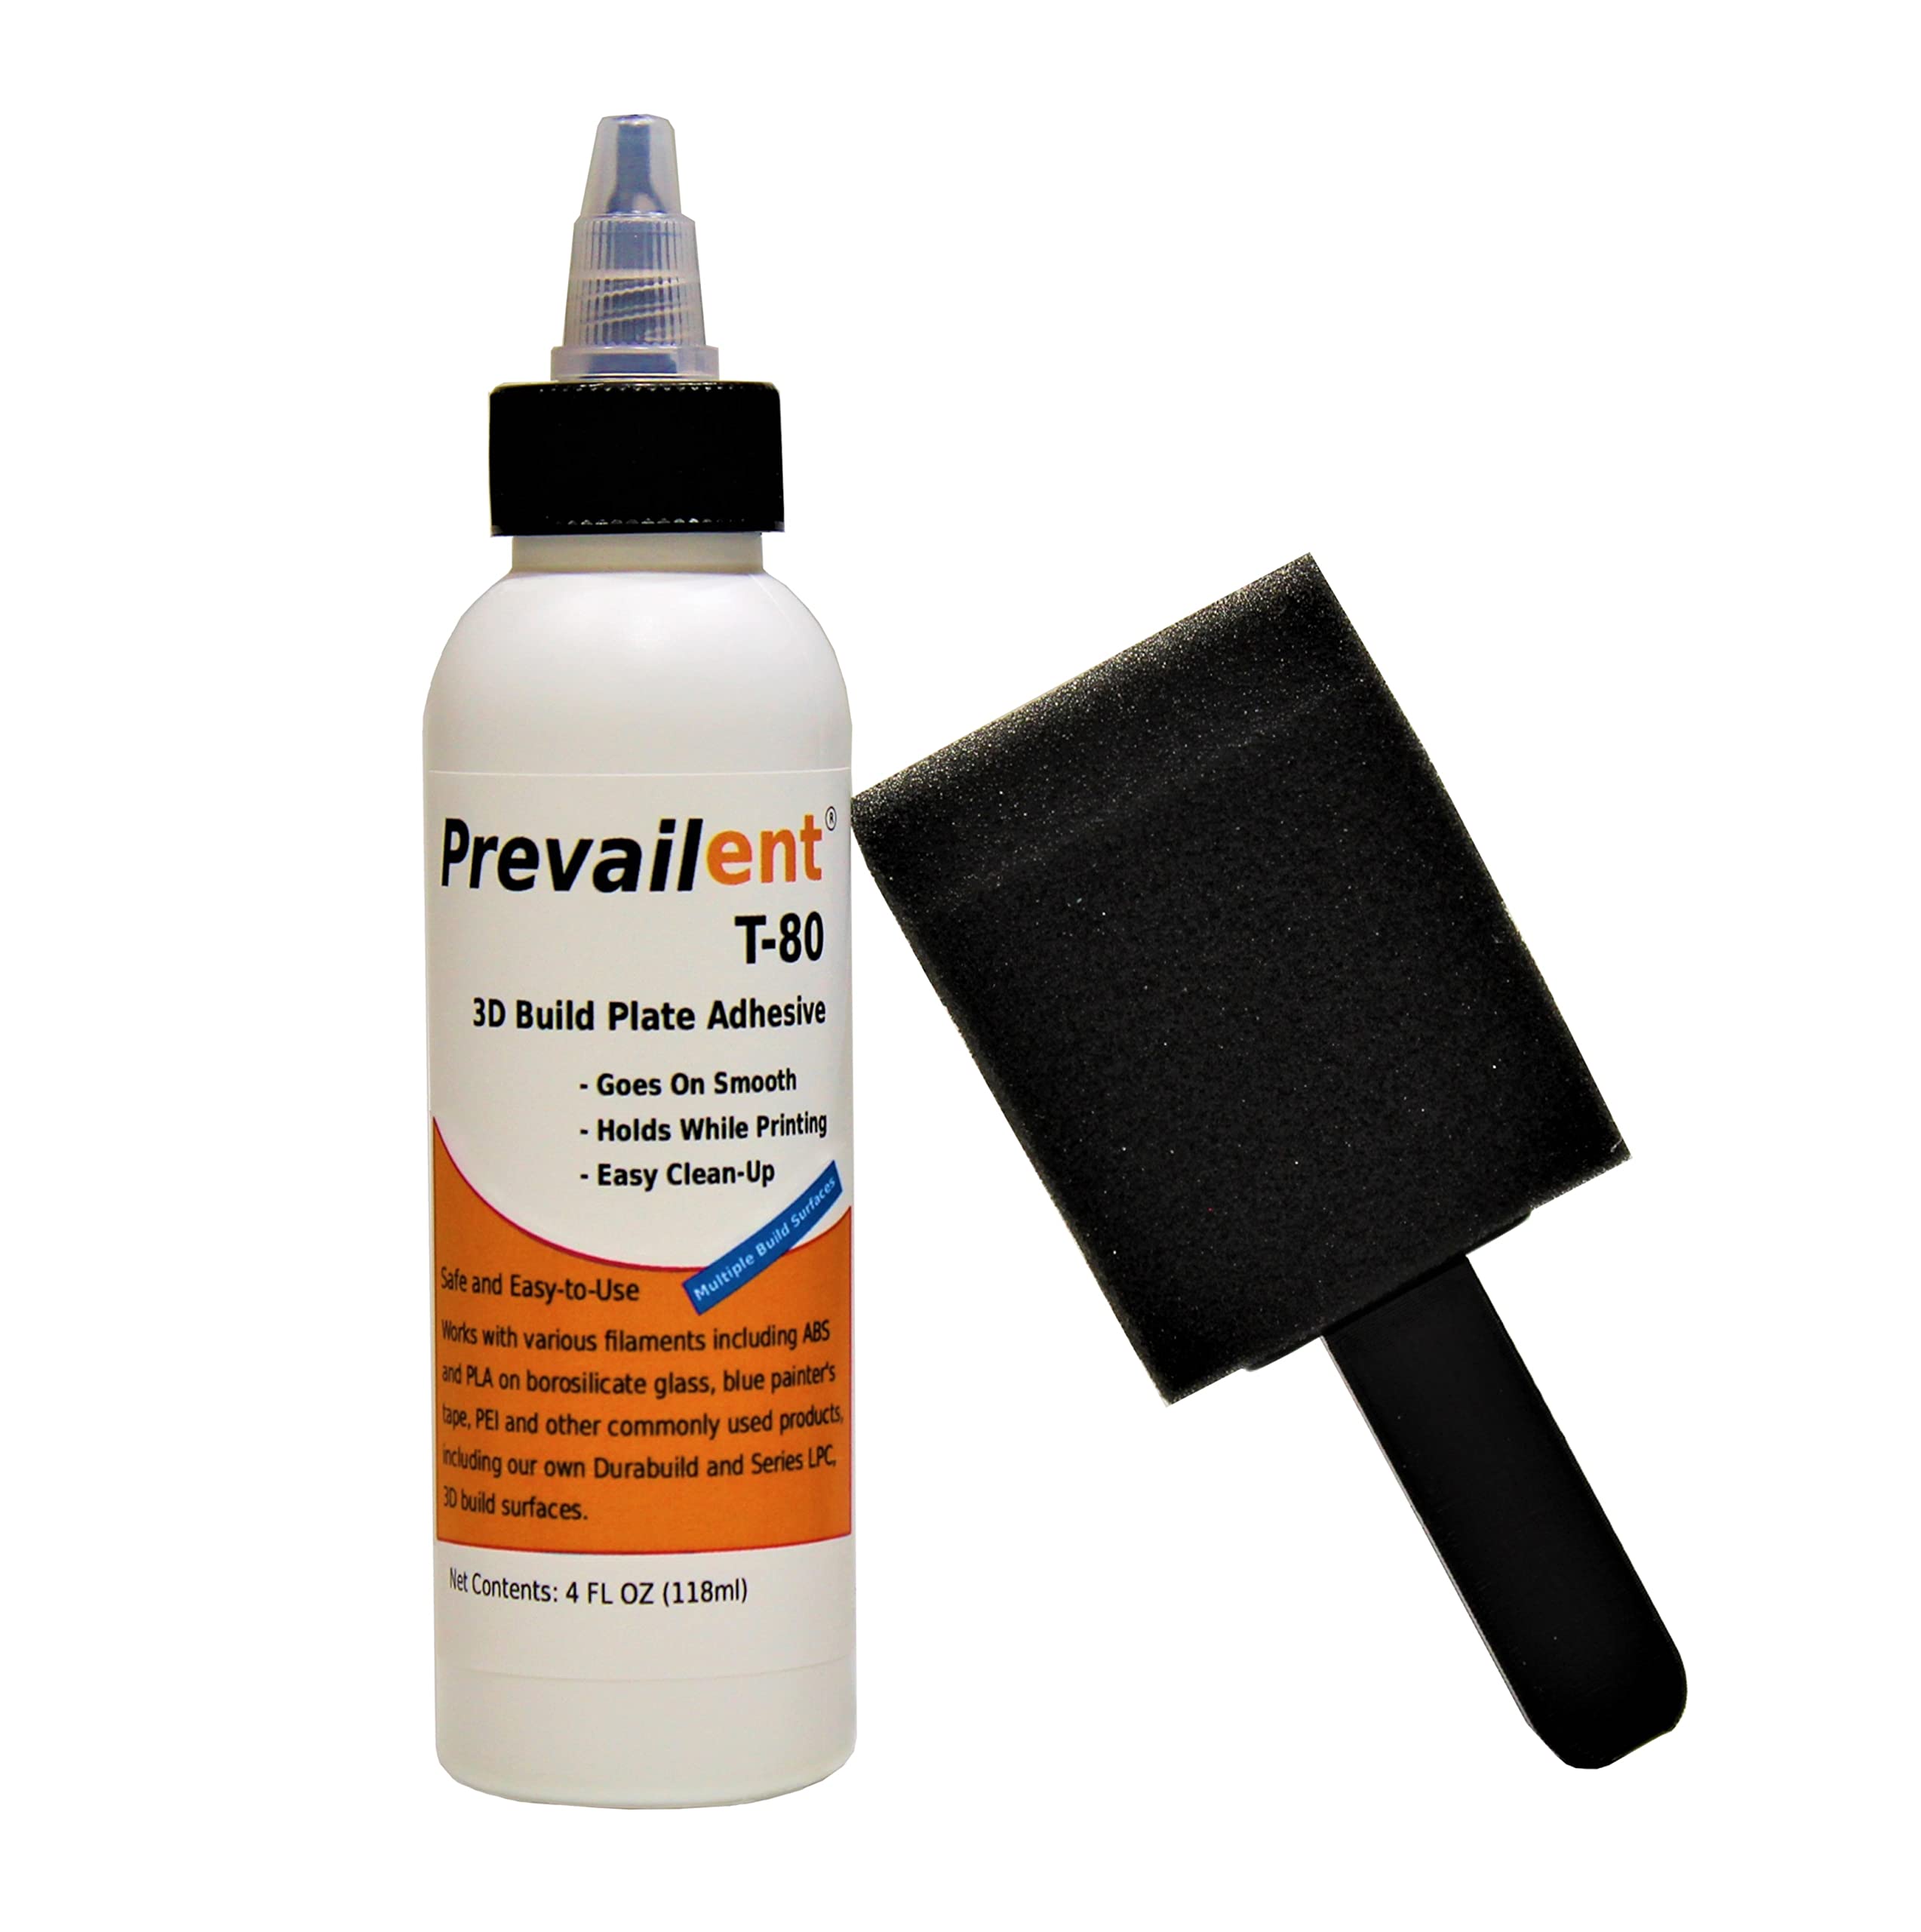 Prevailent T-80, 3D Printer Bed Adhesive Glue - Helps Prevent Warping, Strong Hold and Easy Release with Various Build Plates and Filament Types Including PLA, ABS, TPU, and PETG, 4 fl oz. (118ml)